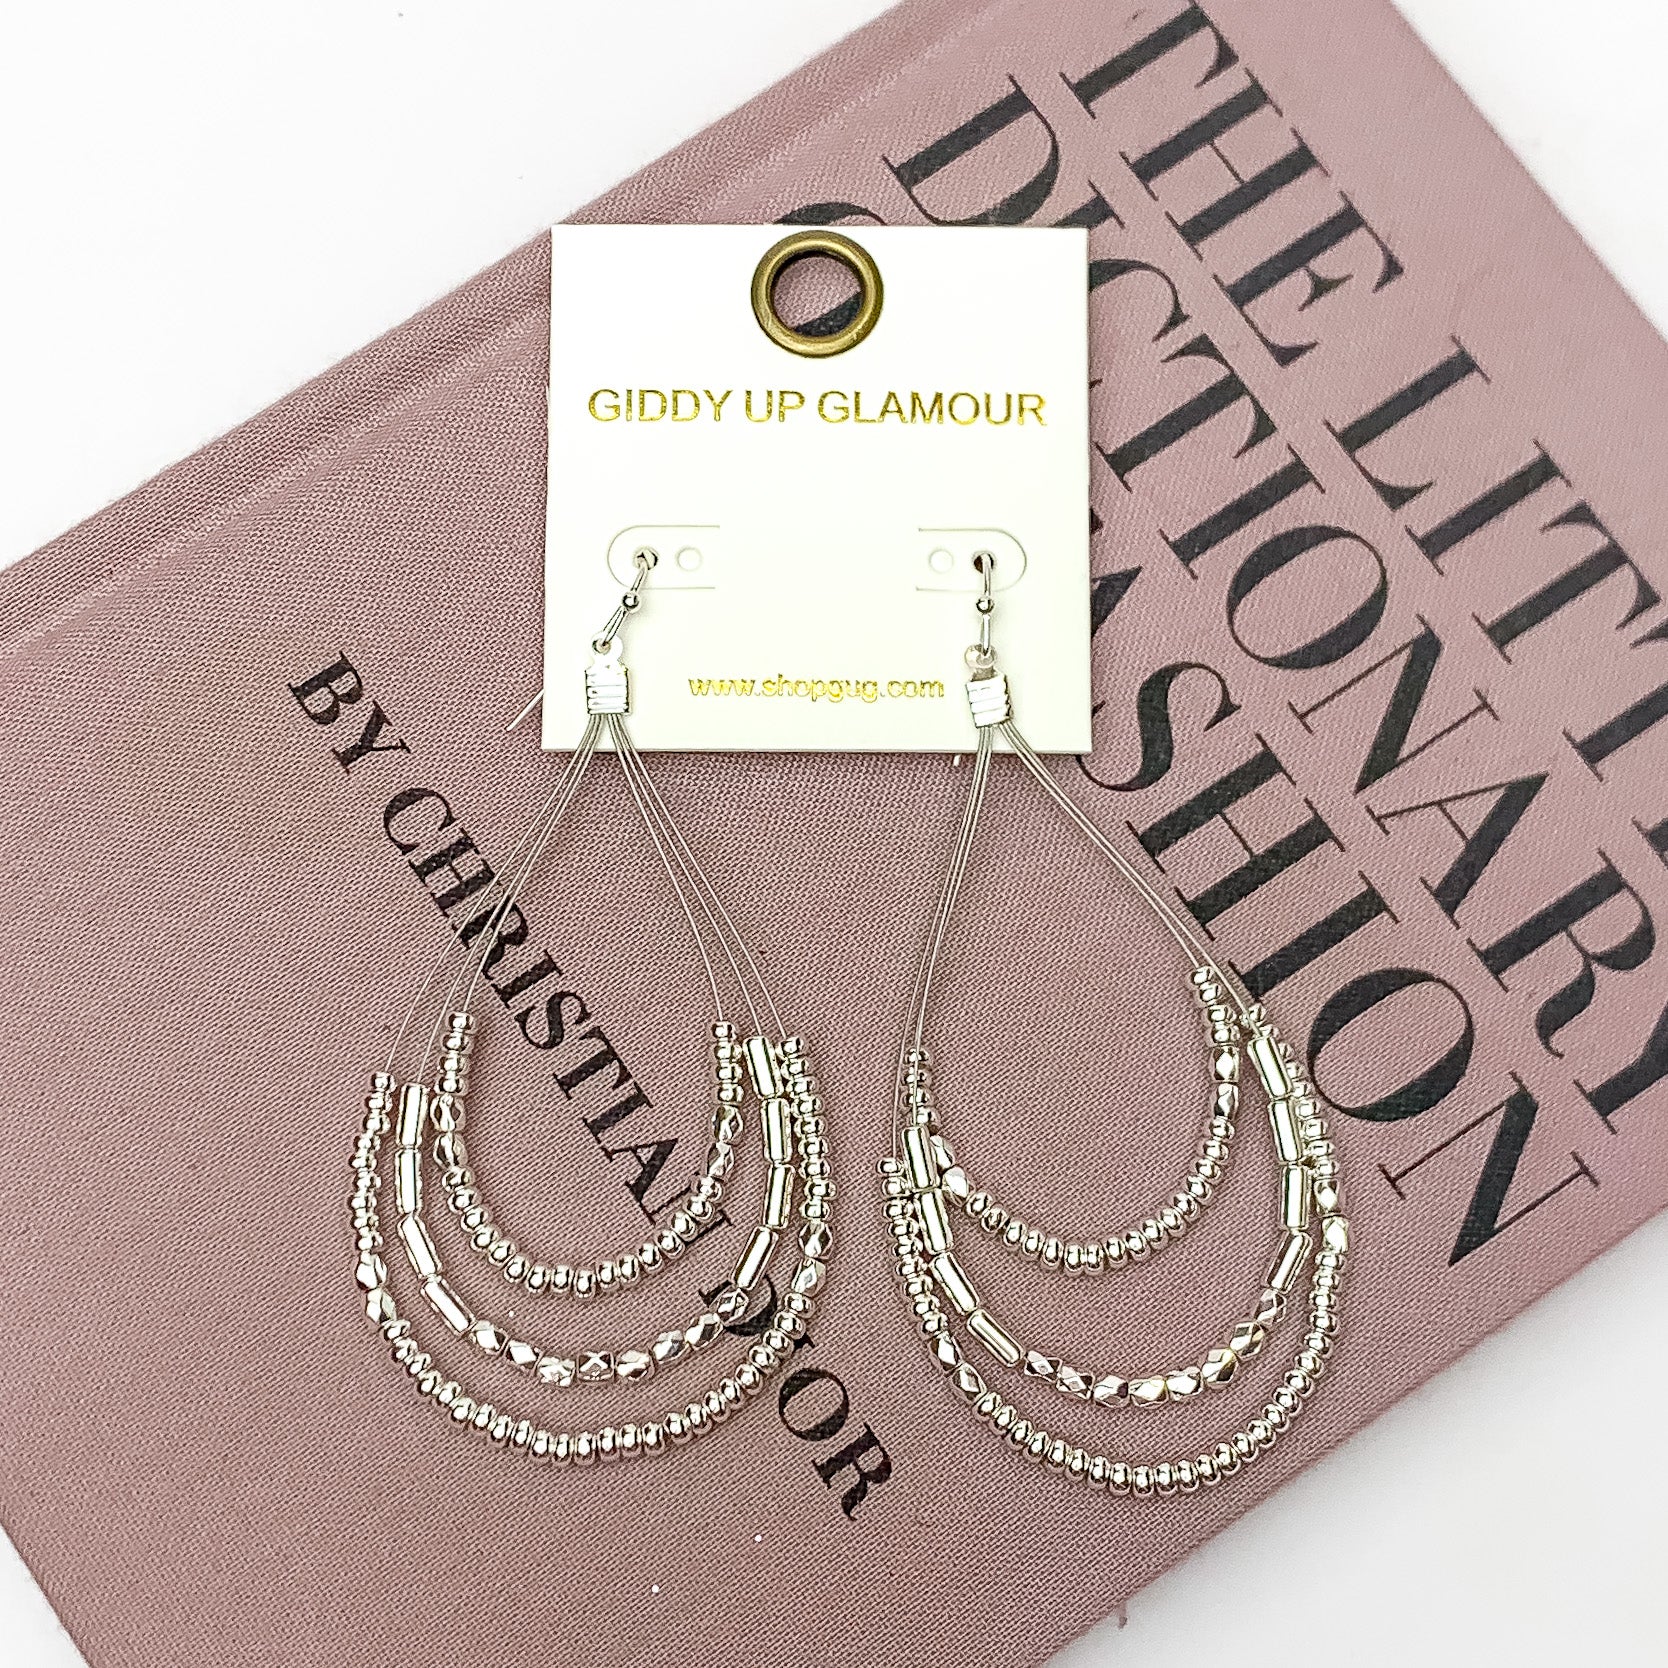 Layered Open Teardrop Earrings With Beads in Silver Tone. Pictured on a white background with the earrings laying on a pink book.